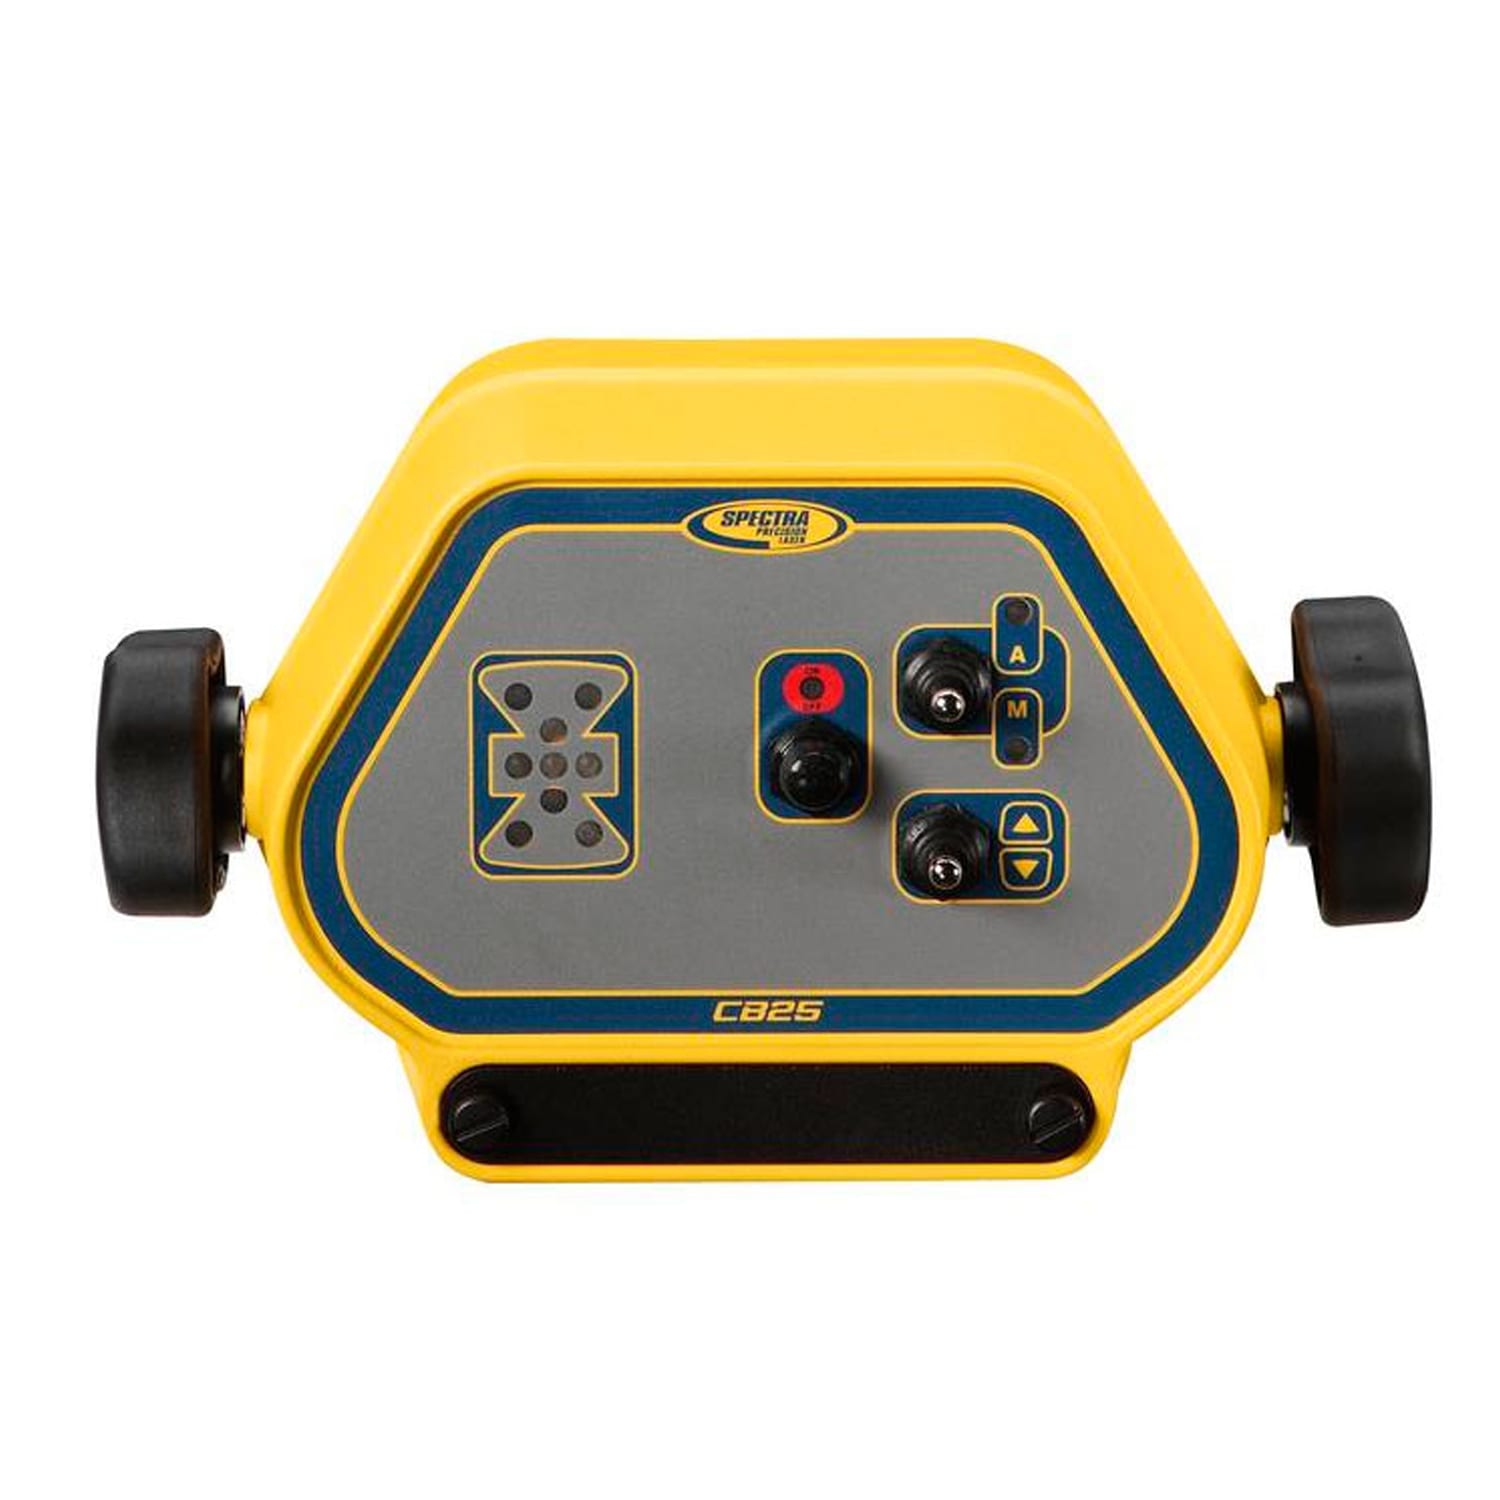 5 of the best topcon laser levels 2